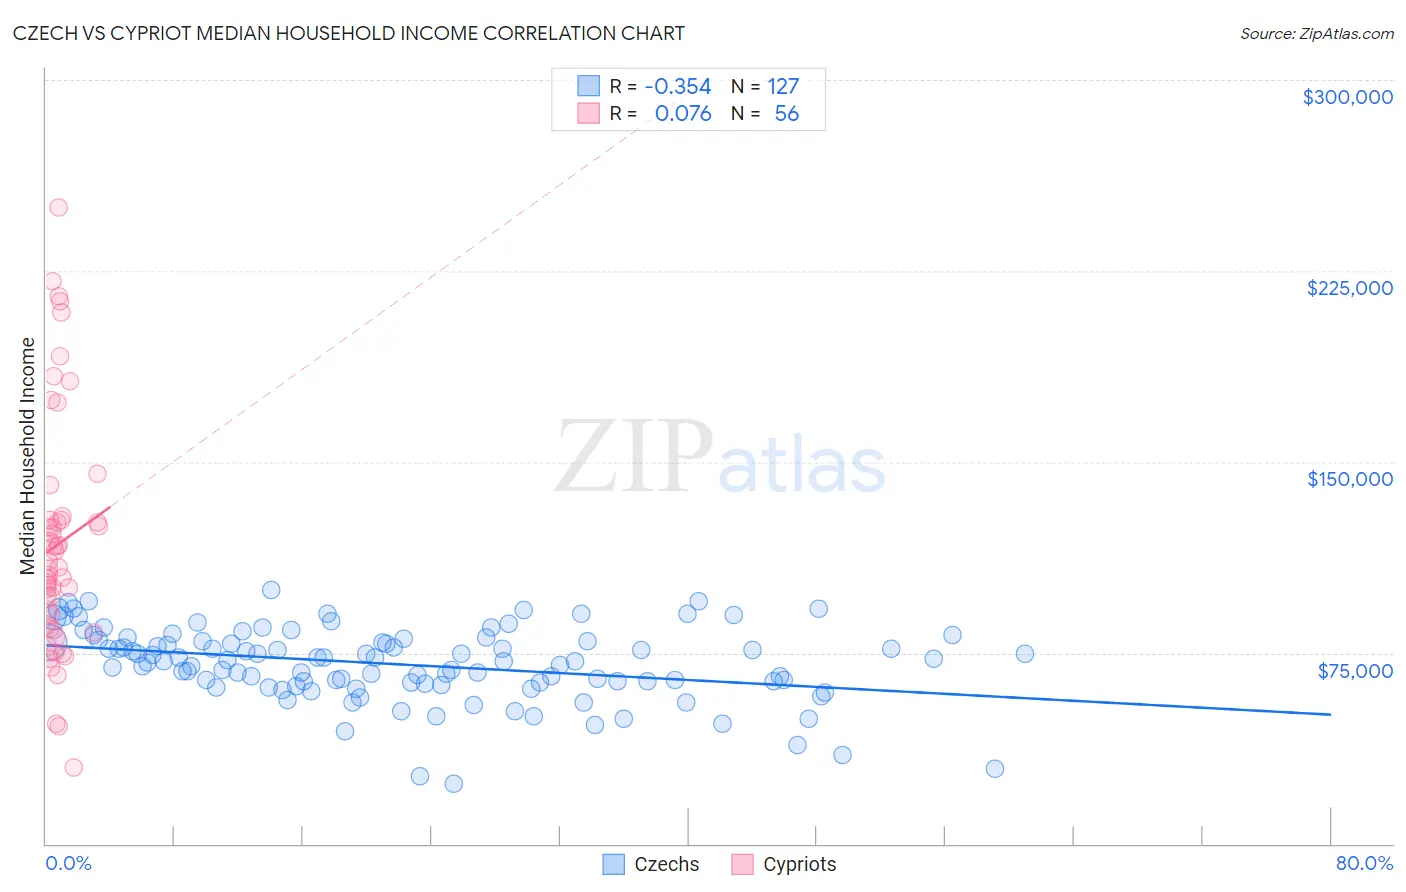 Czech vs Cypriot Median Household Income